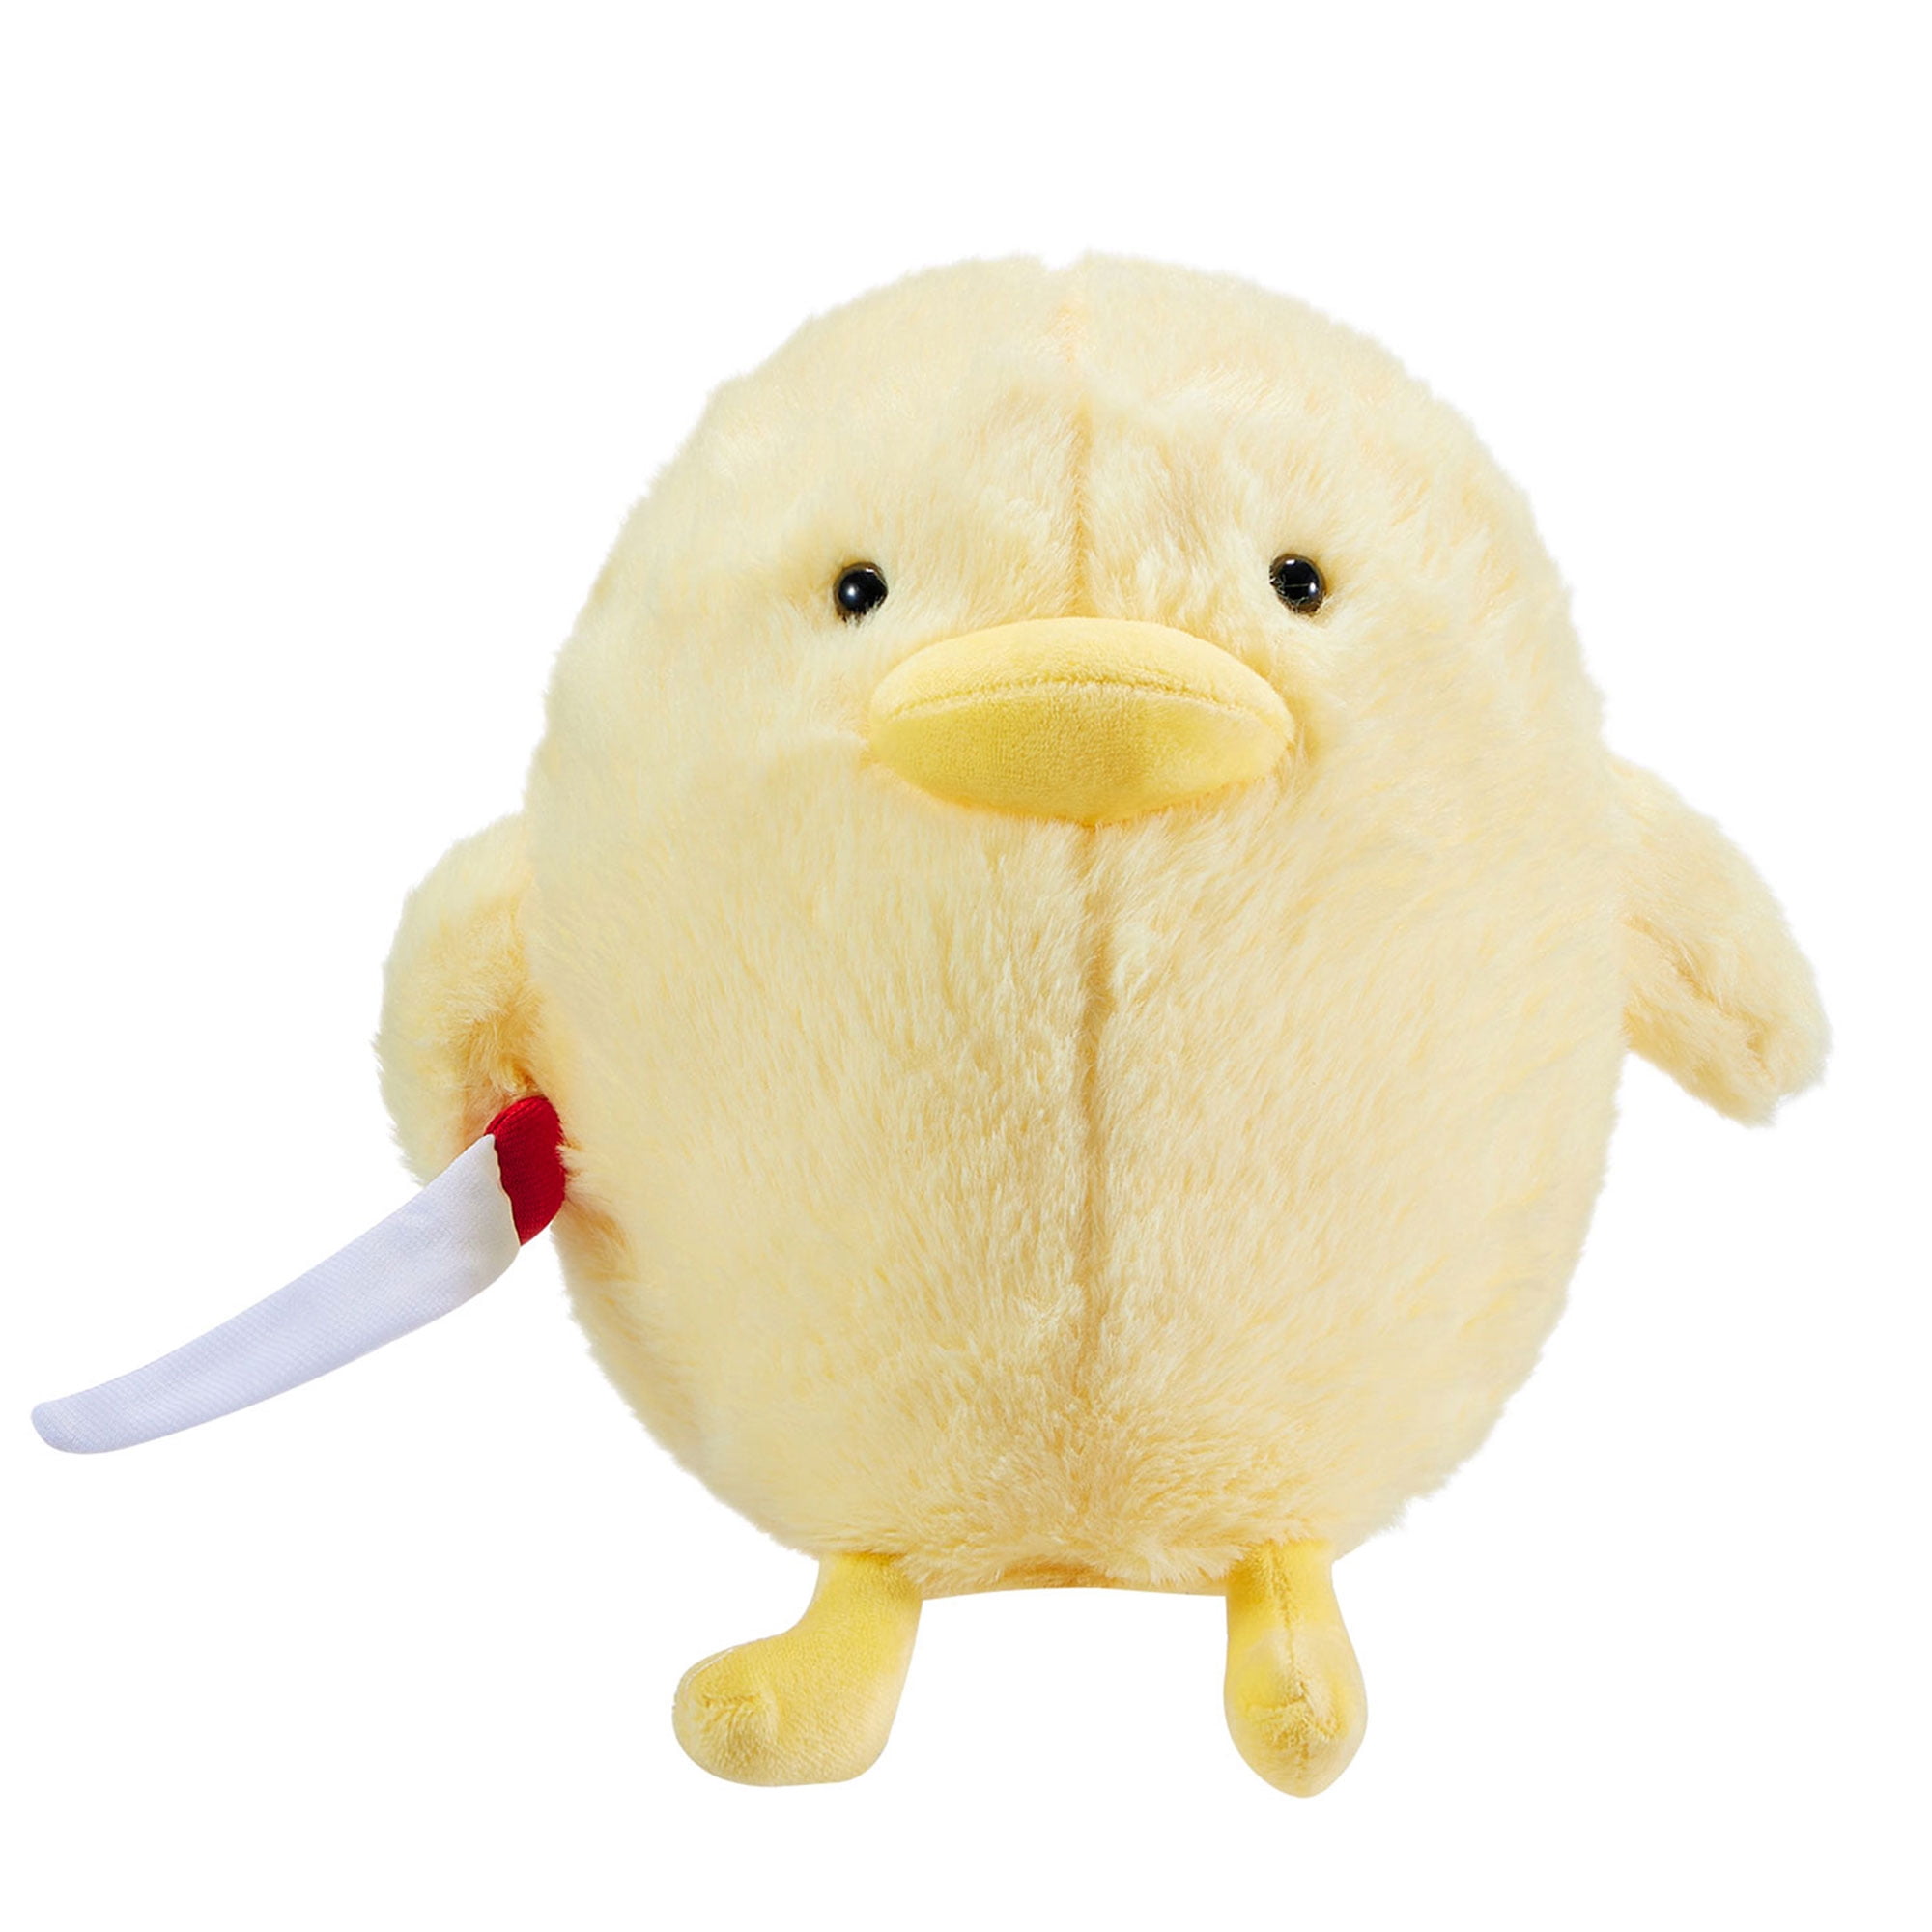 Aunavey Cute Duck with Knife Plushies Toy, Soft Stuffed Animal Plush ...